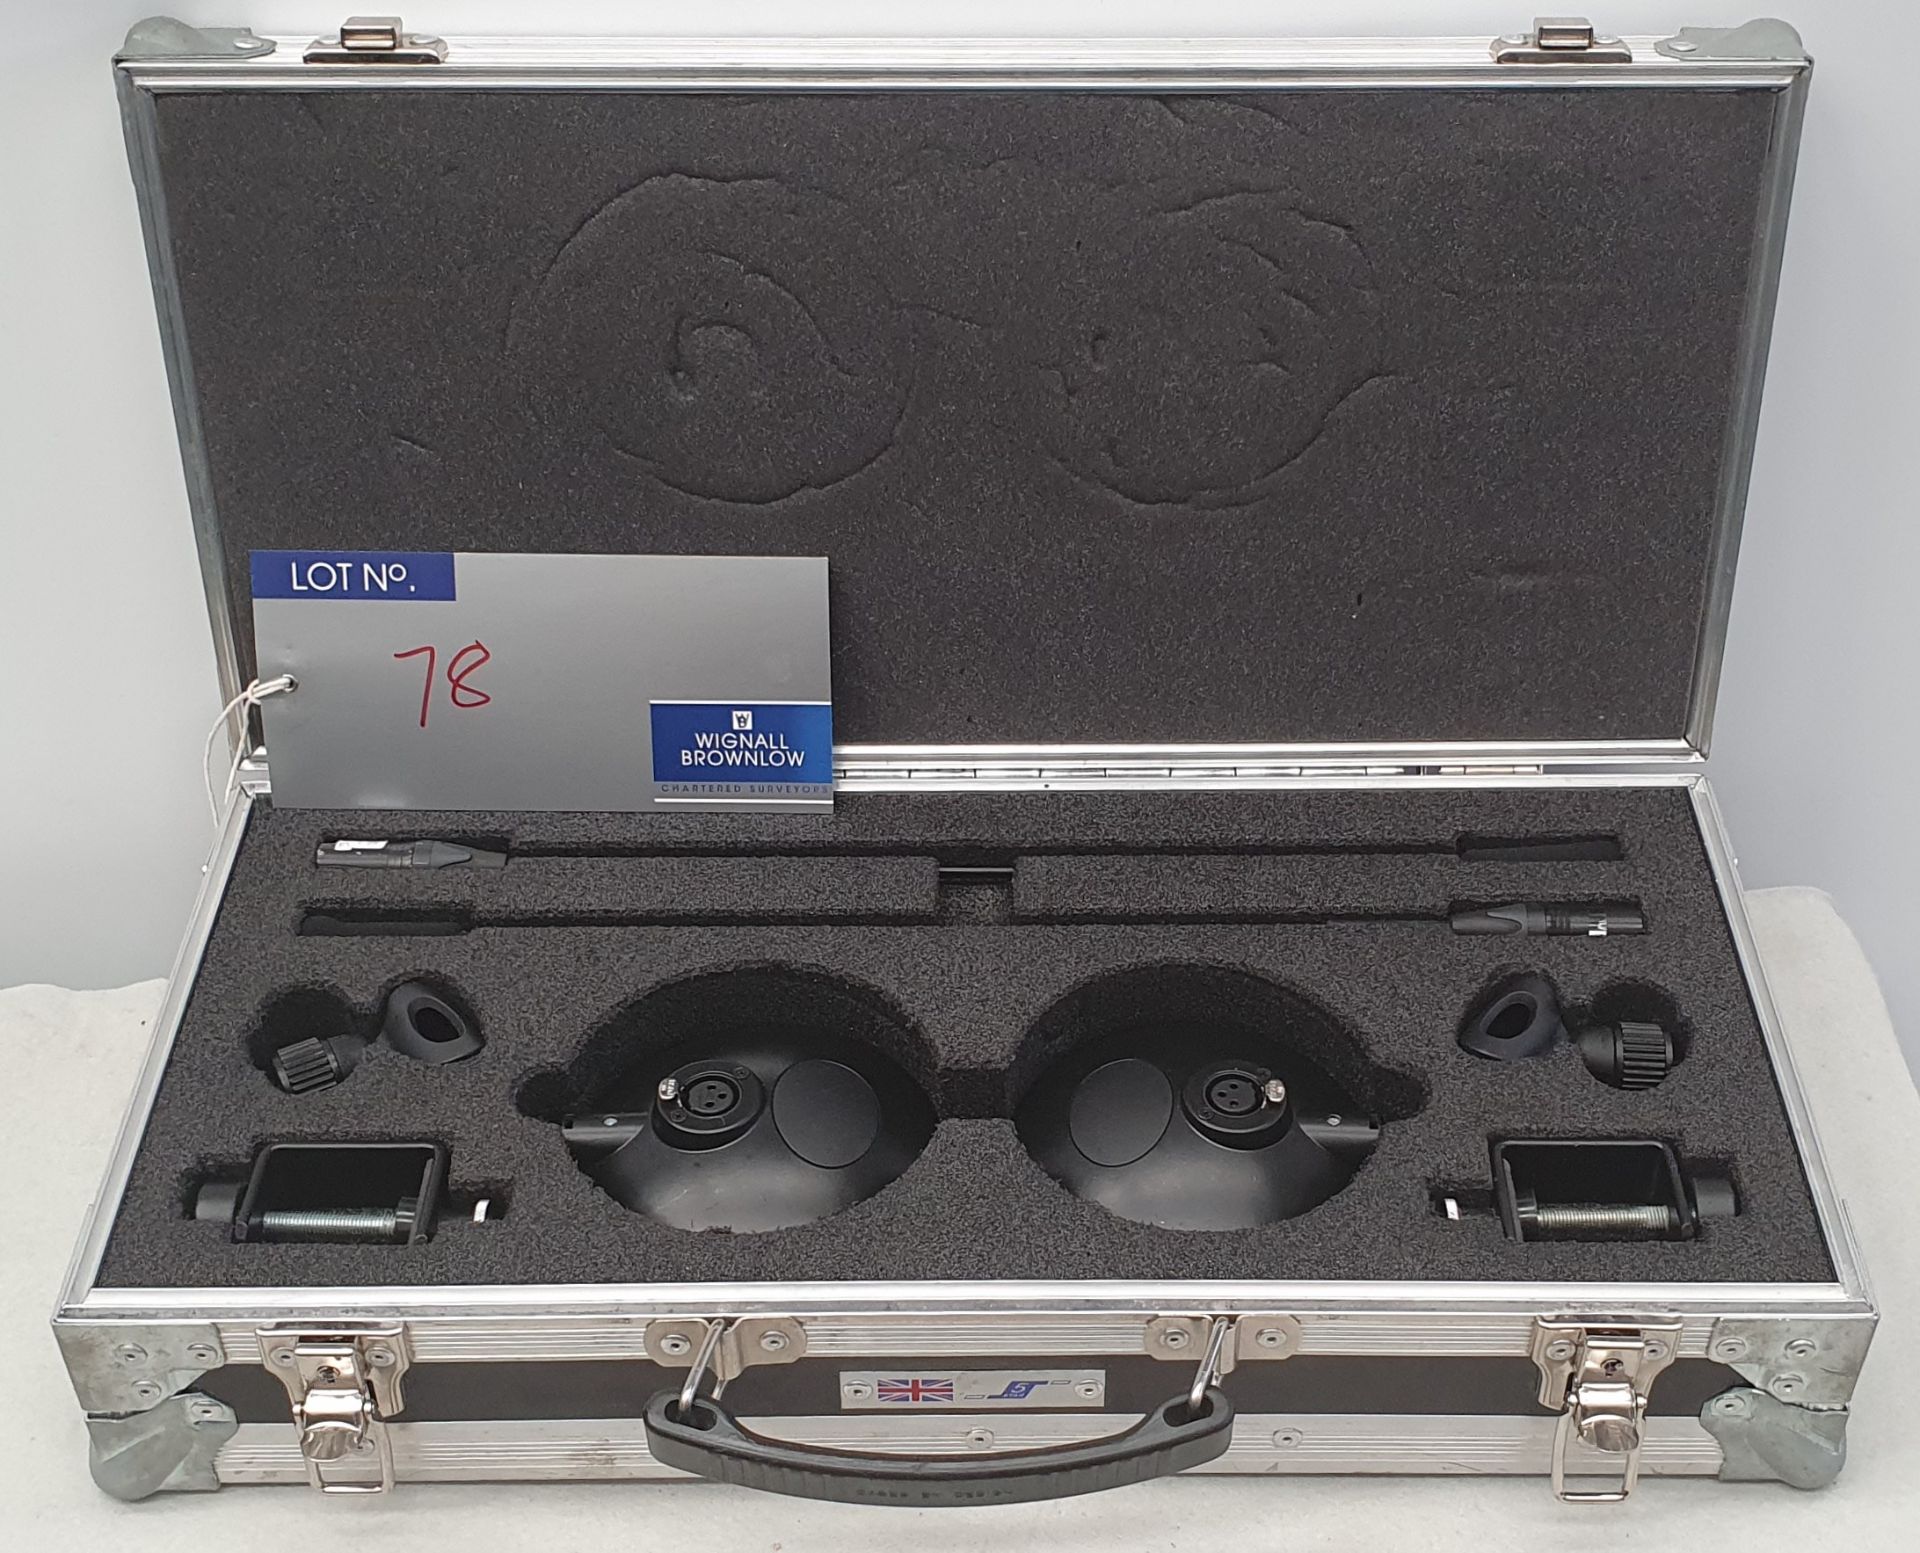 A DPA Lecturn Microphone Kit comprising: 2 DPA Lecturn Microphones, 2 K+M Microphone Table Bases, - Image 2 of 2